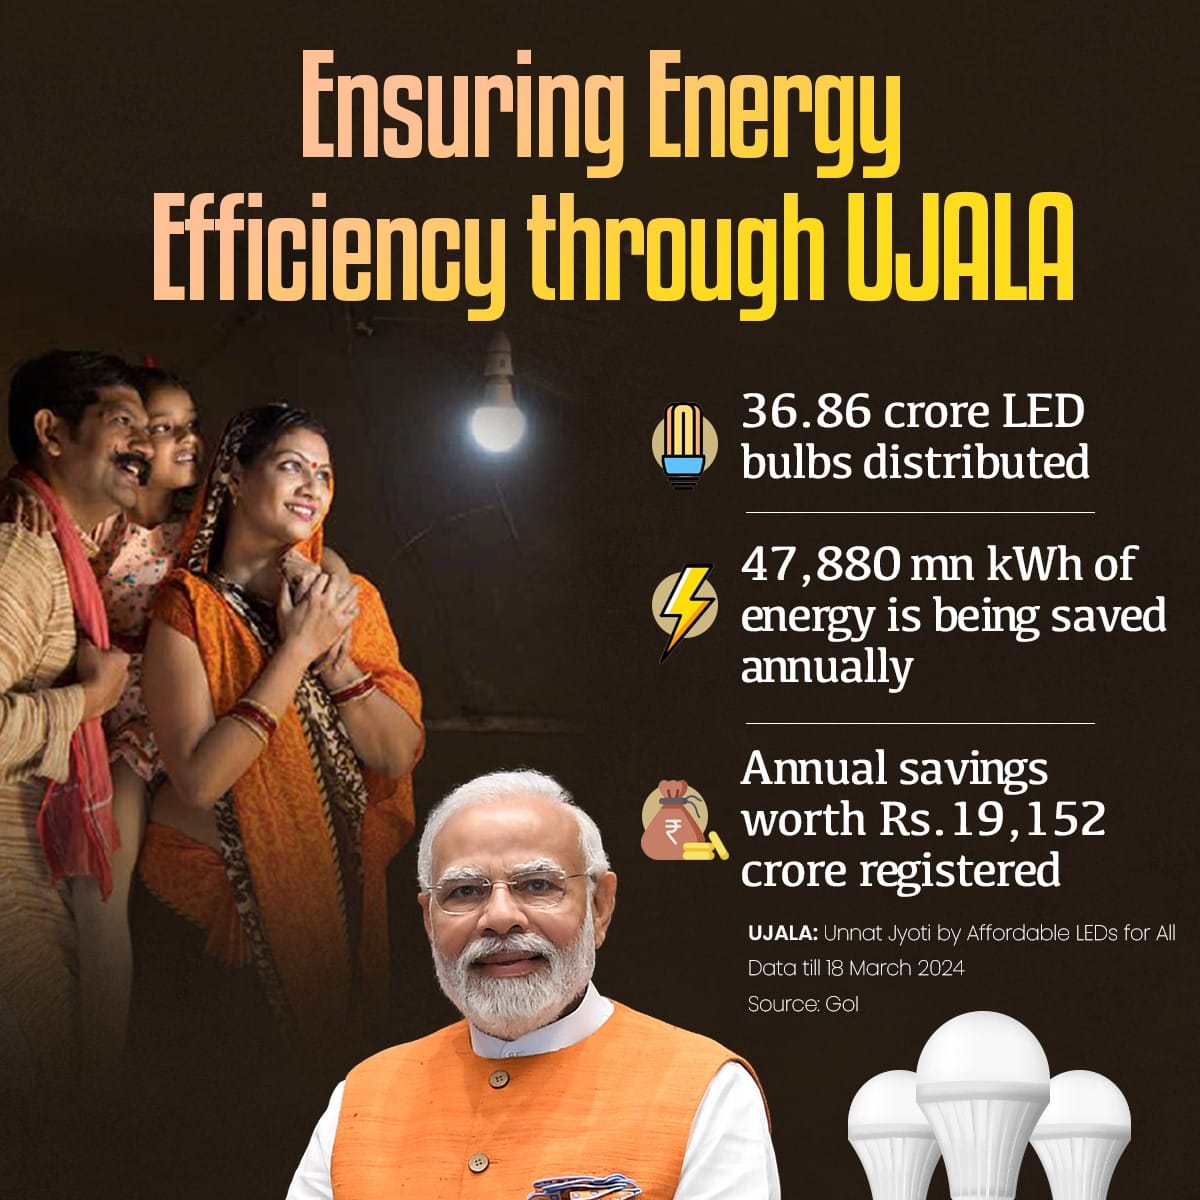 The @narendramodi Govt is promoting & ensuring Energy Efficiency through its #Ujala schemes.47,880cr mn kWh of energy is being saved annually.Annual savings of ₹19,152cr have been registered. This is a very welcome news.!#TabhiTohSabModiKoChunteHain